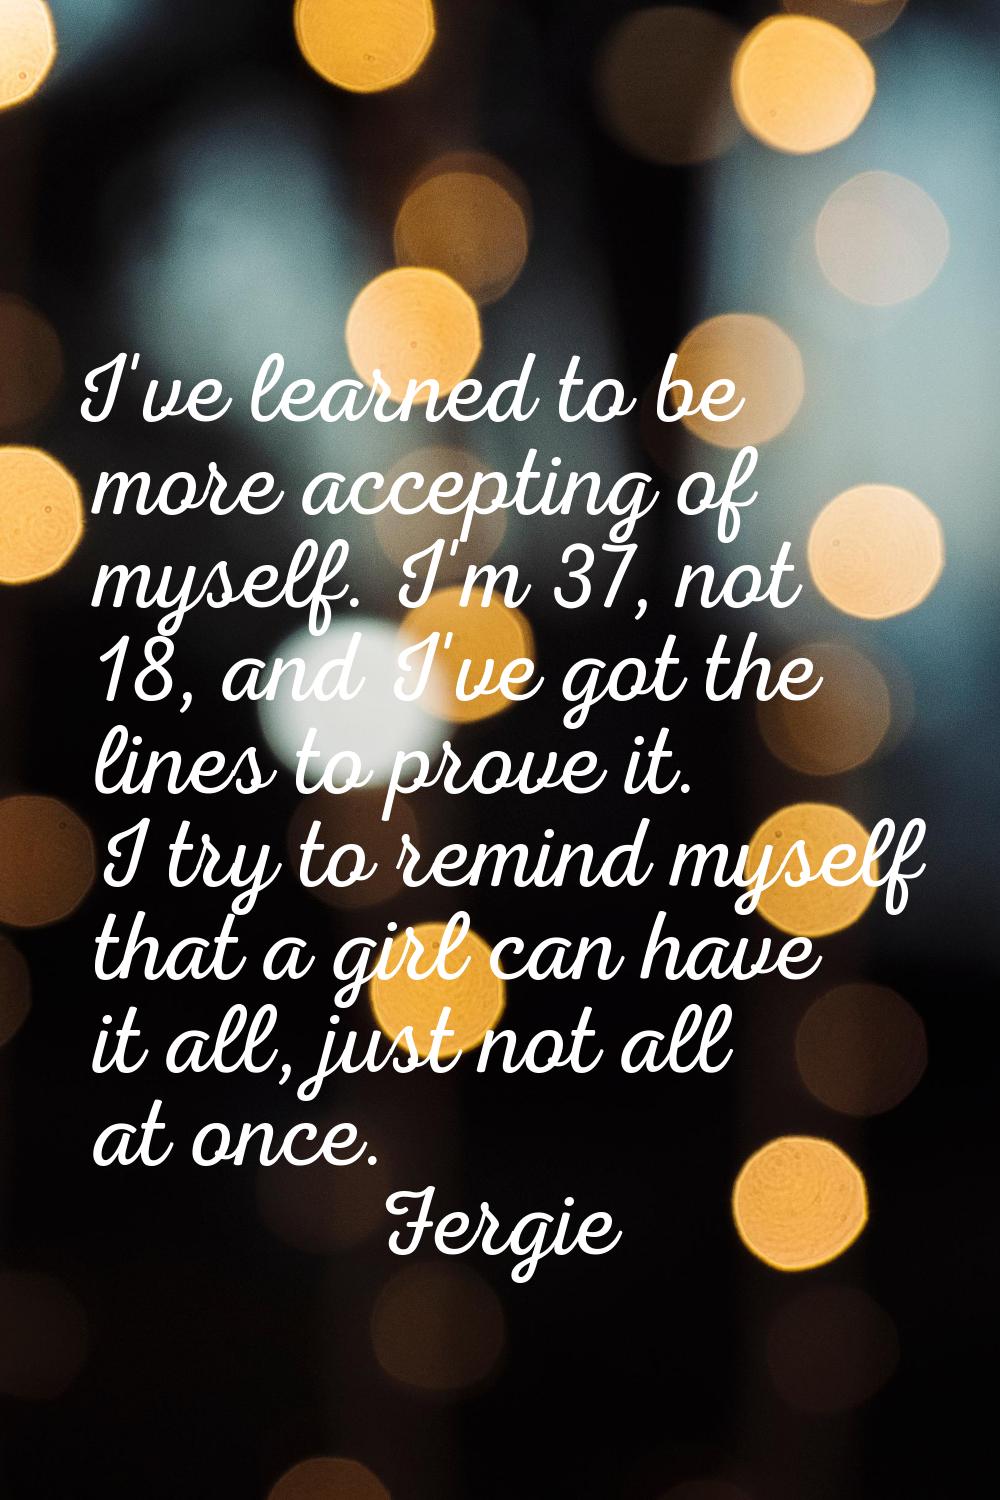 I've learned to be more accepting of myself. I'm 37, not 18, and I've got the lines to prove it. I 